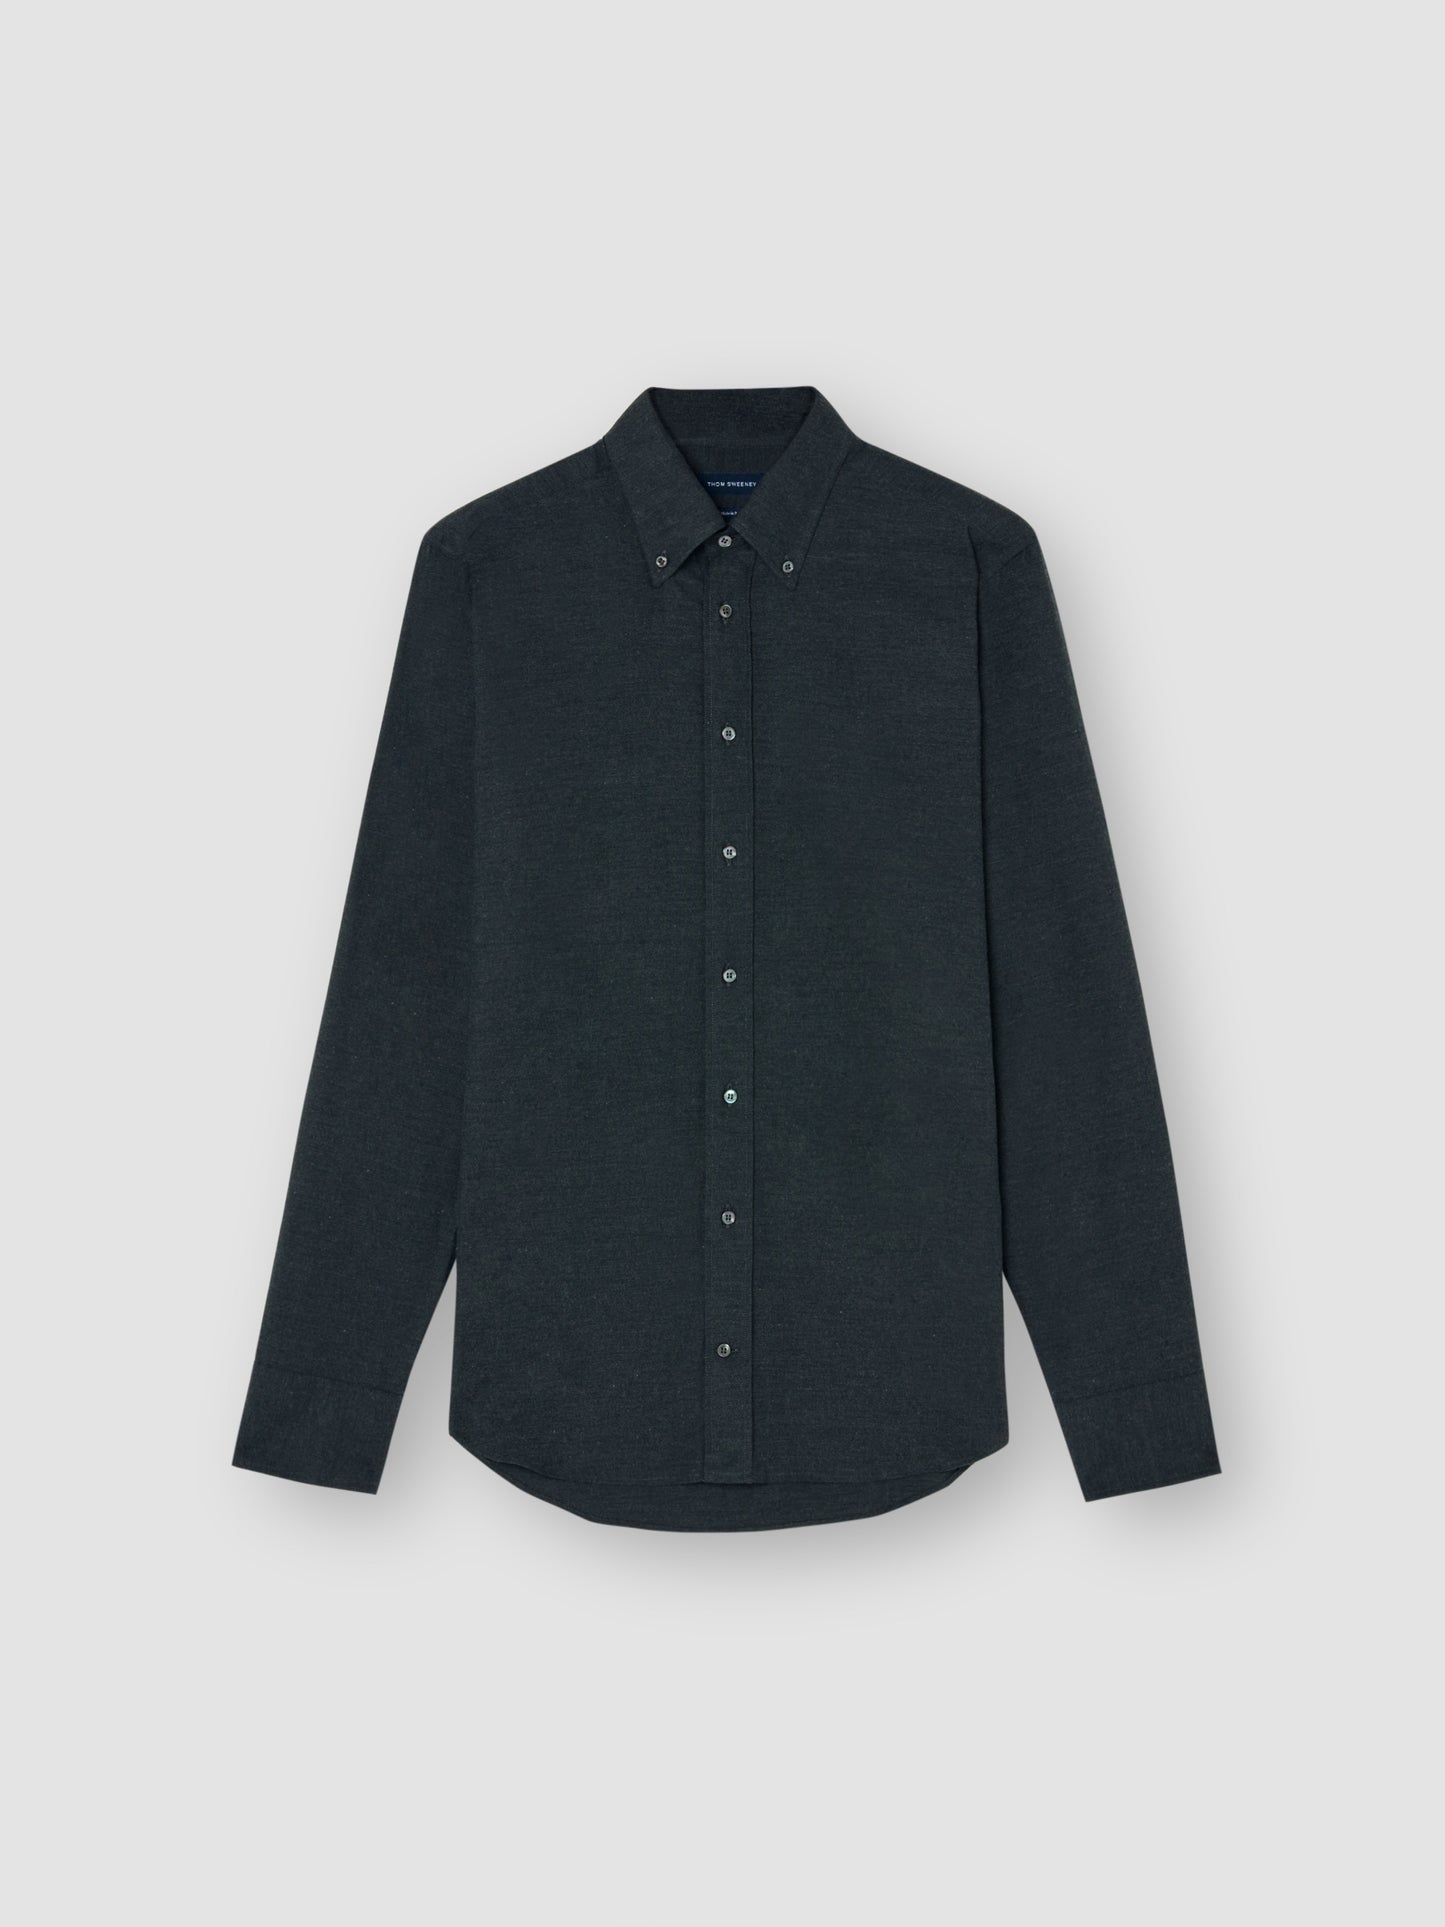 Flannel Button Down Collar Shirt Charcoal Product Image